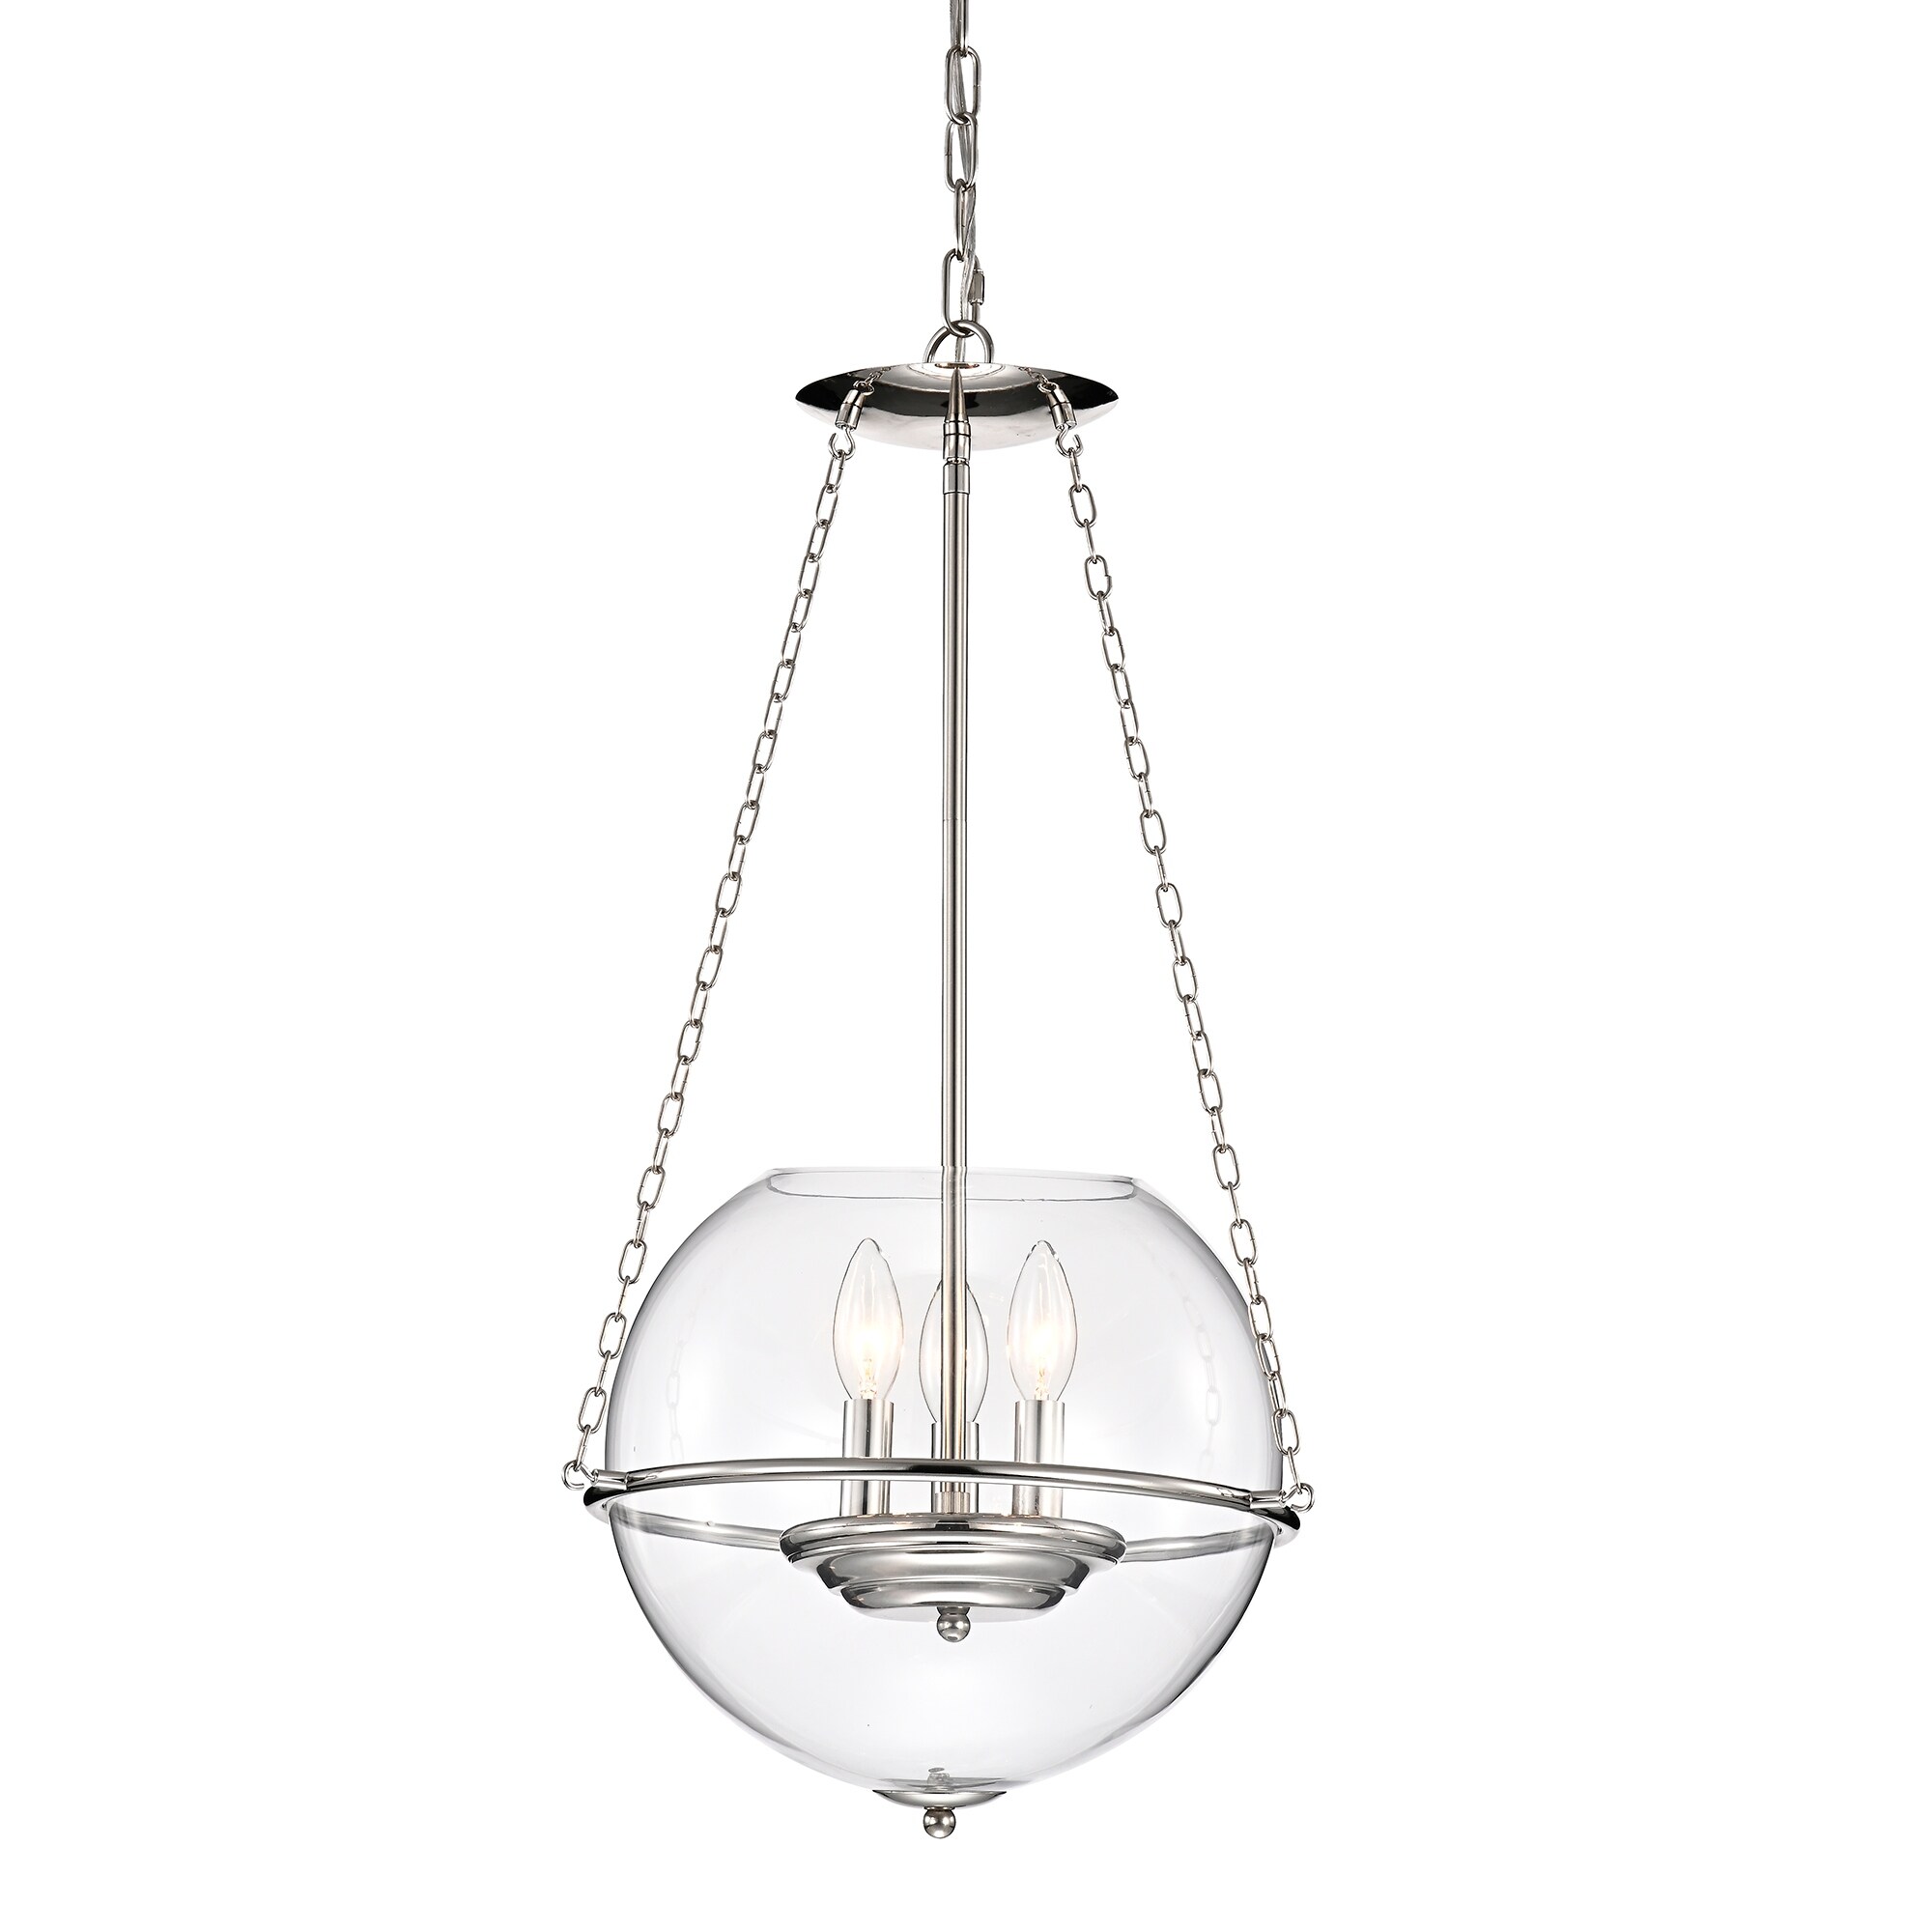 Polished Nickel 3-Light Chandelier with Globe Glass Shade